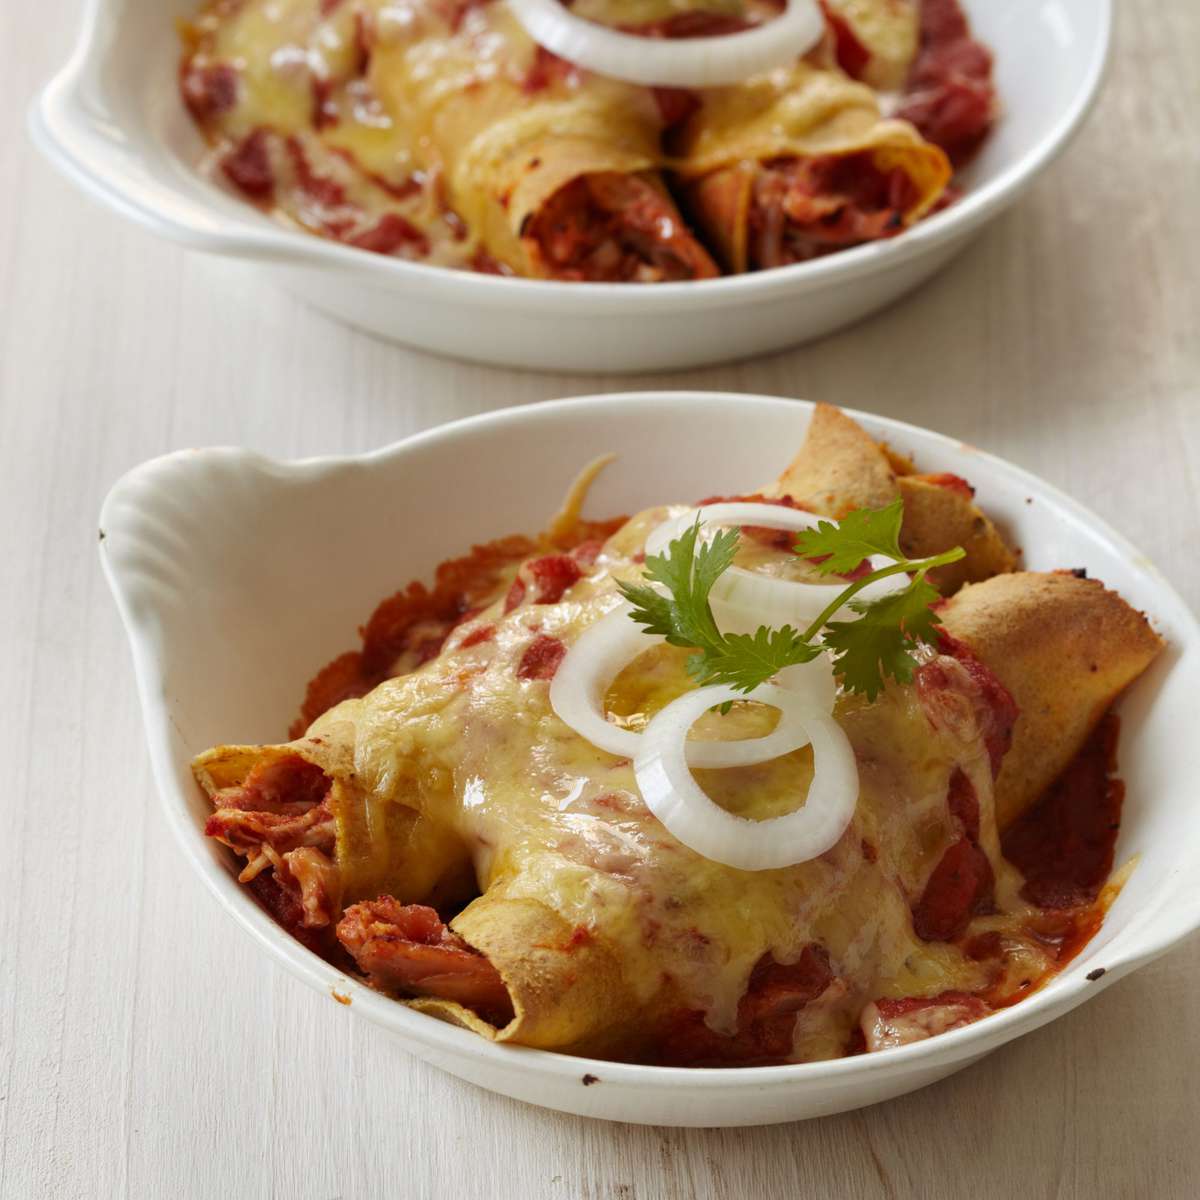 Creamy Enchiladas with Chicken, Tomatoes and Green Chile